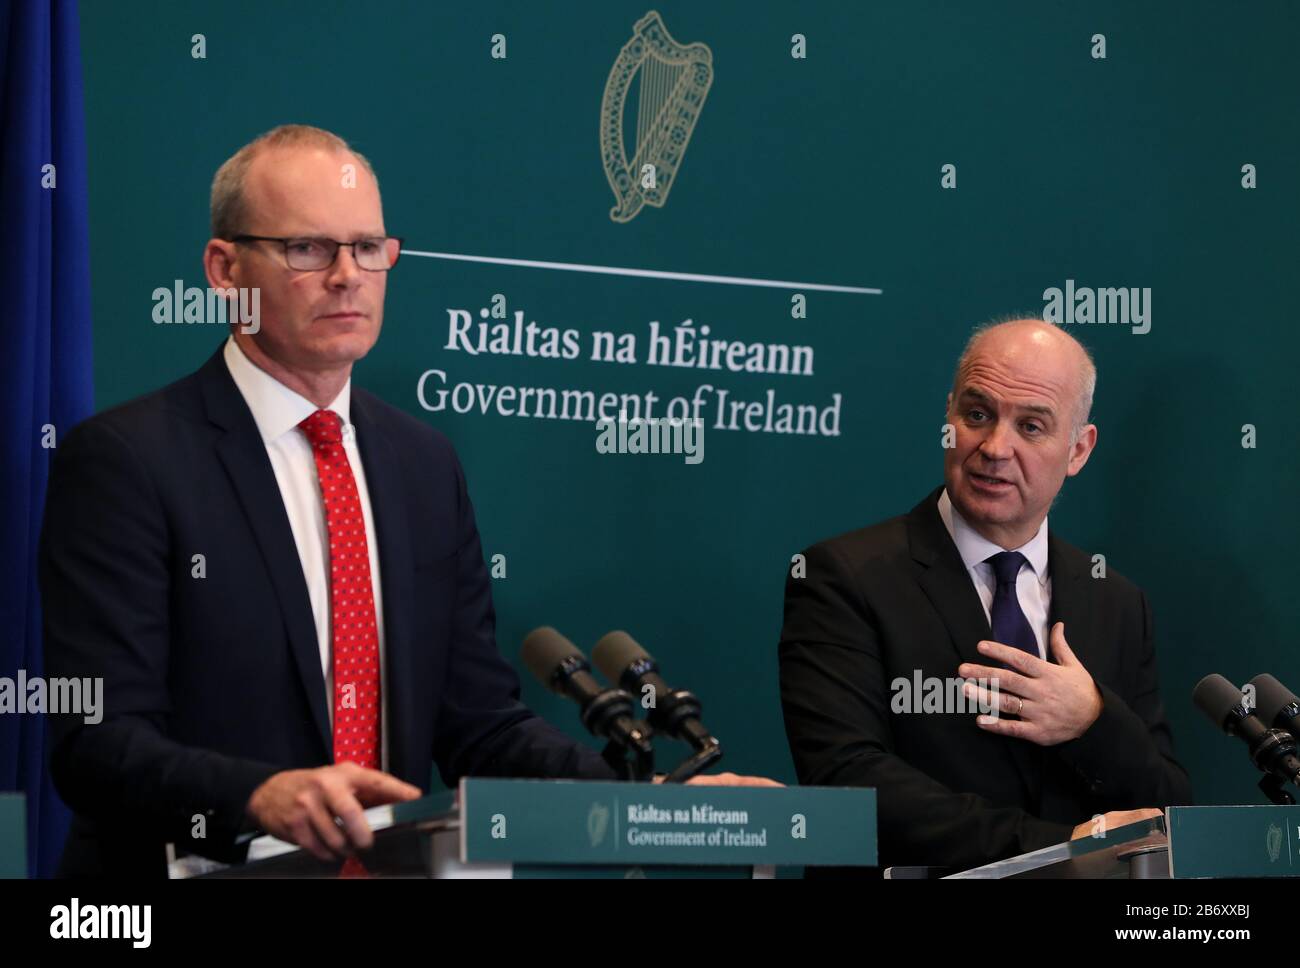 T‡naiste Simon Coveney (left) and Chief Medical Officer Tony Holohan at a news conference at Government Buildings in Dublin after Irish premier Leo Varadkar announced that all schools, colleges and childcare facilities in Ireland will close until March 29 as a result of the Covid-19 outbreak. Stock Photo